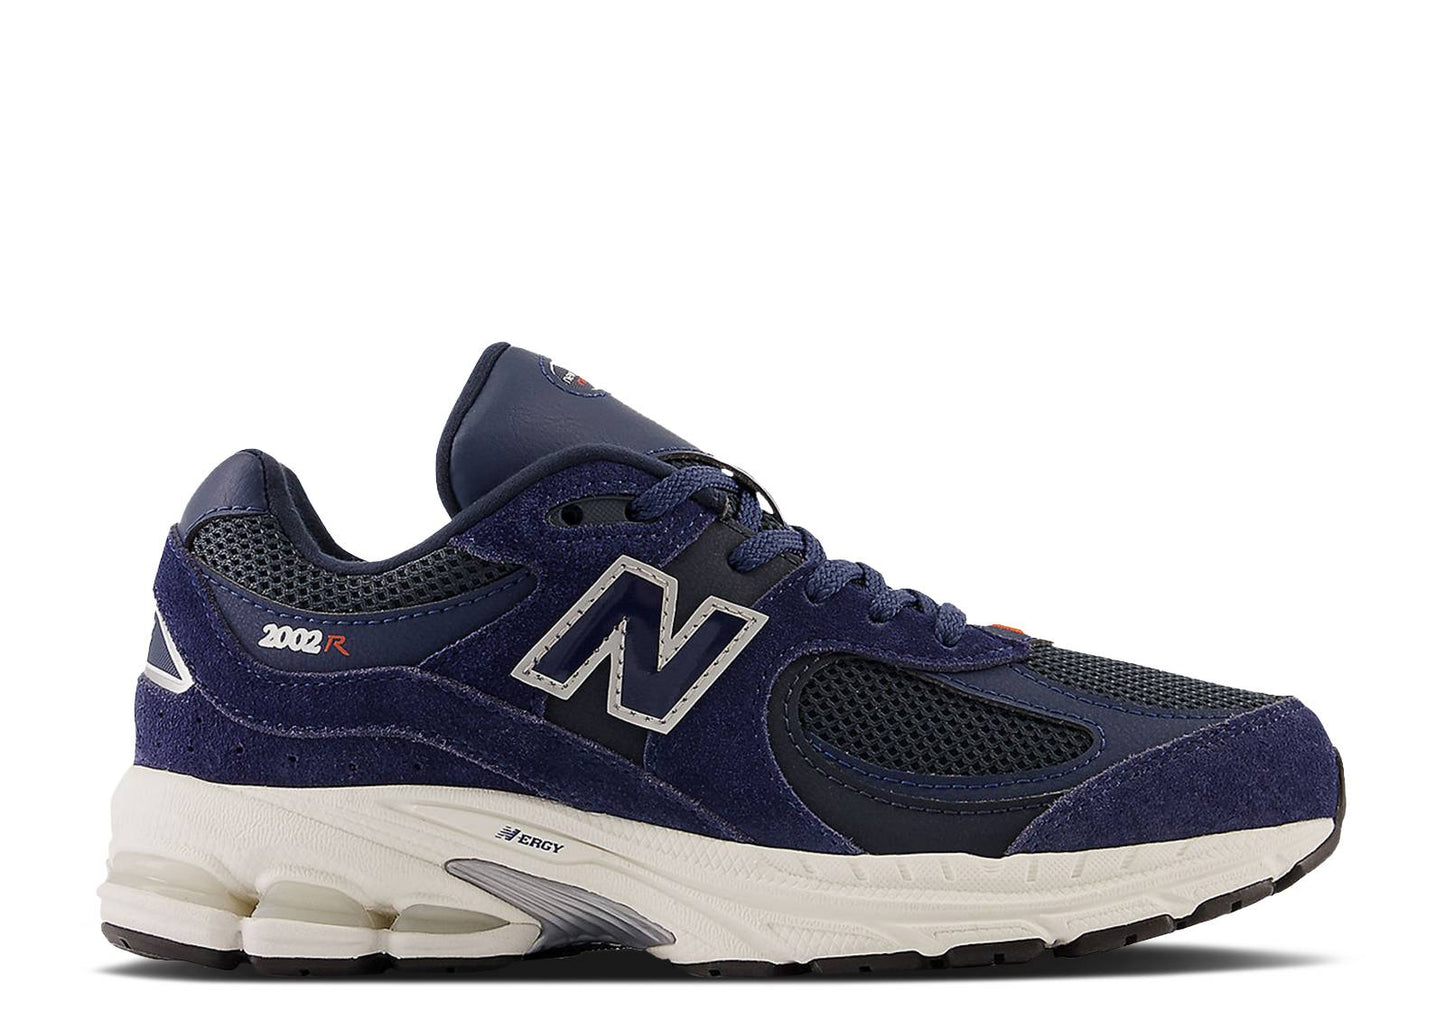 New Balance 2002R GS "Navy Outerspace"